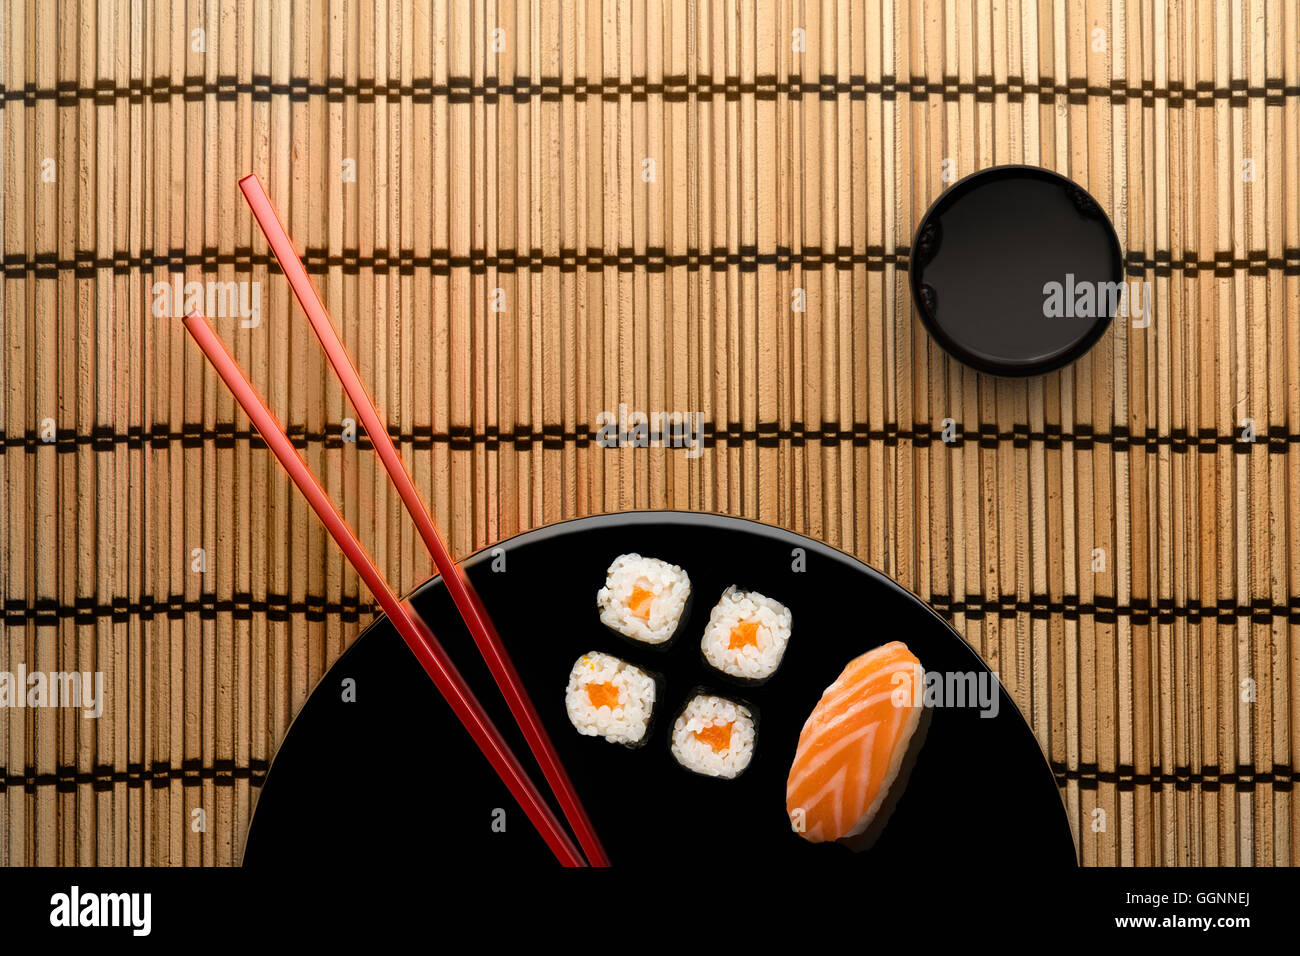 Chopsticks and sushi on round plate with dipping sauce Stock Photo